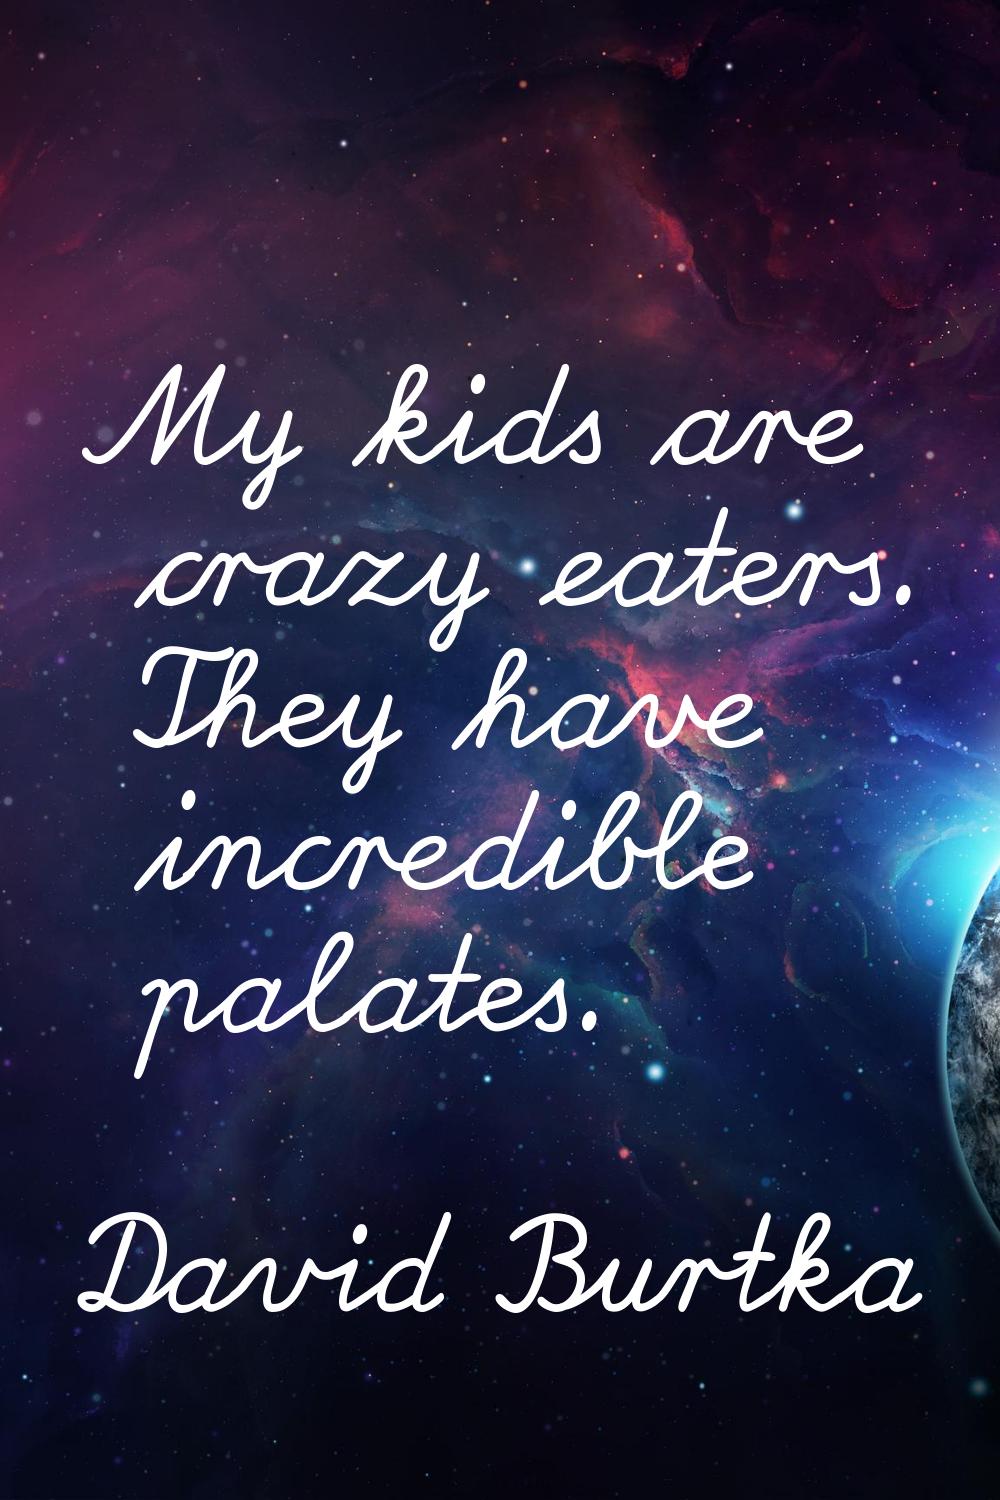 My kids are crazy eaters. They have incredible palates.